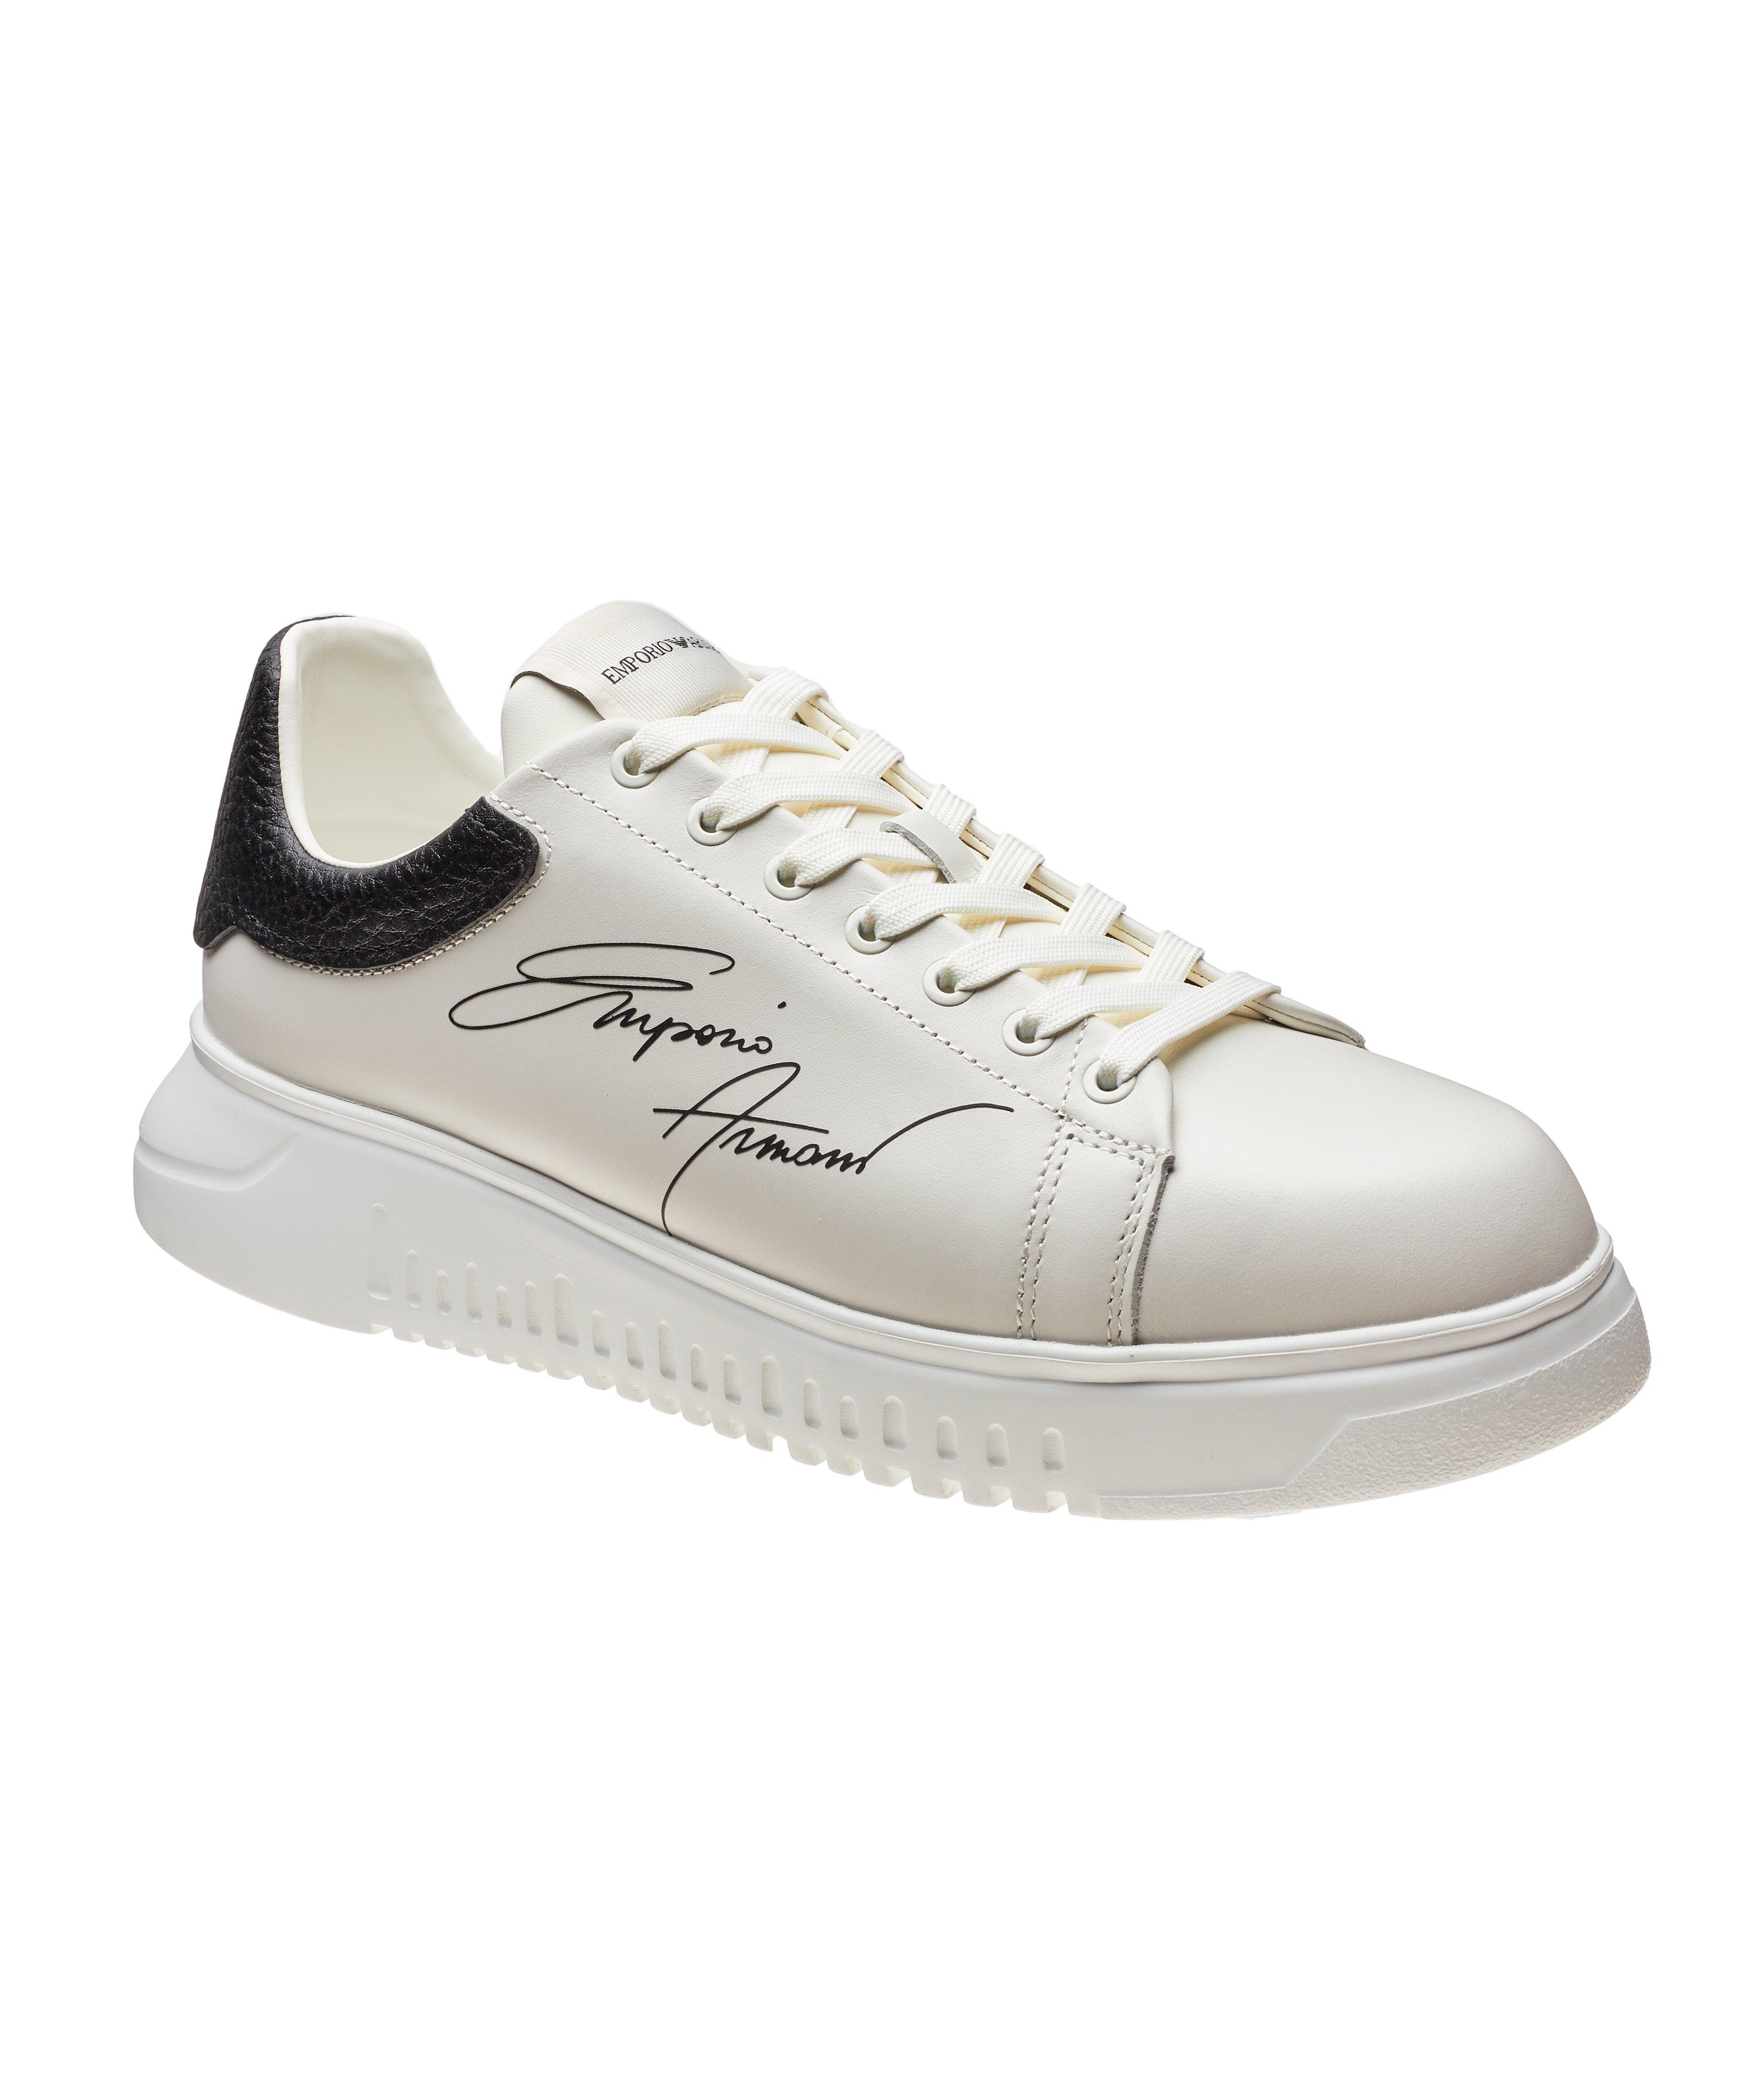 Signature Logo Leather Sneakers image 0